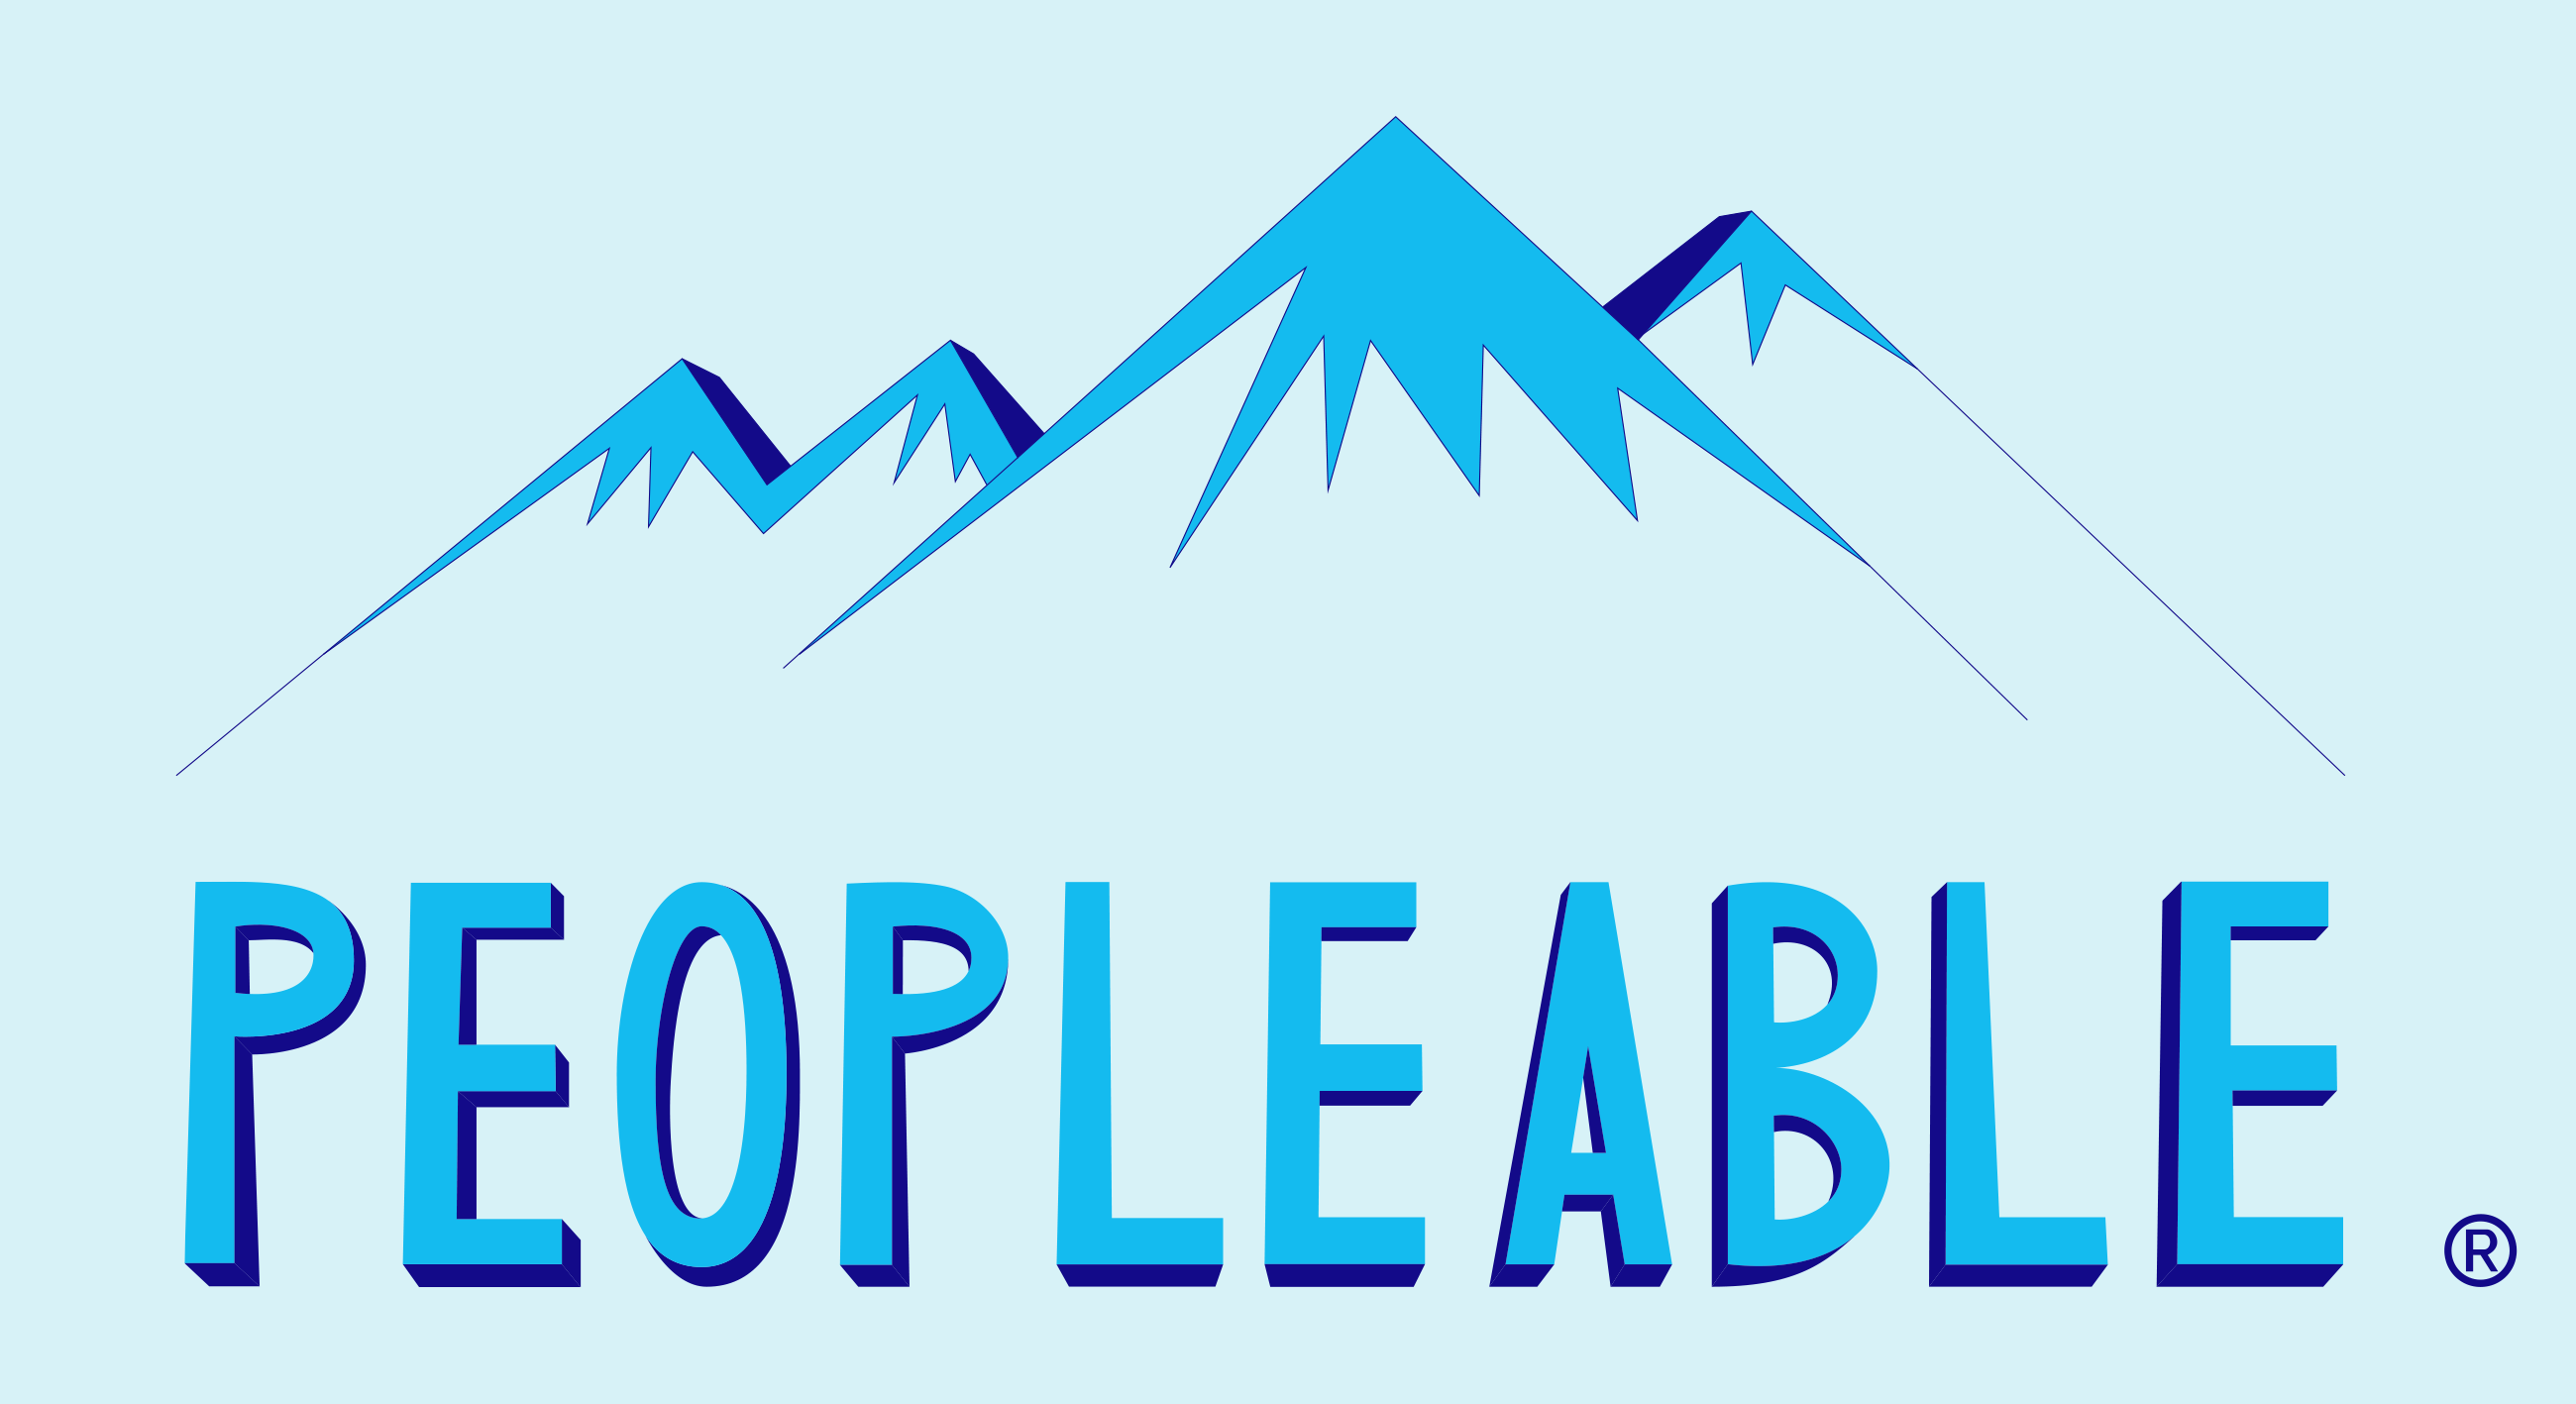 Logo of PEOPLEABLE - the research product category for transforming performance through people